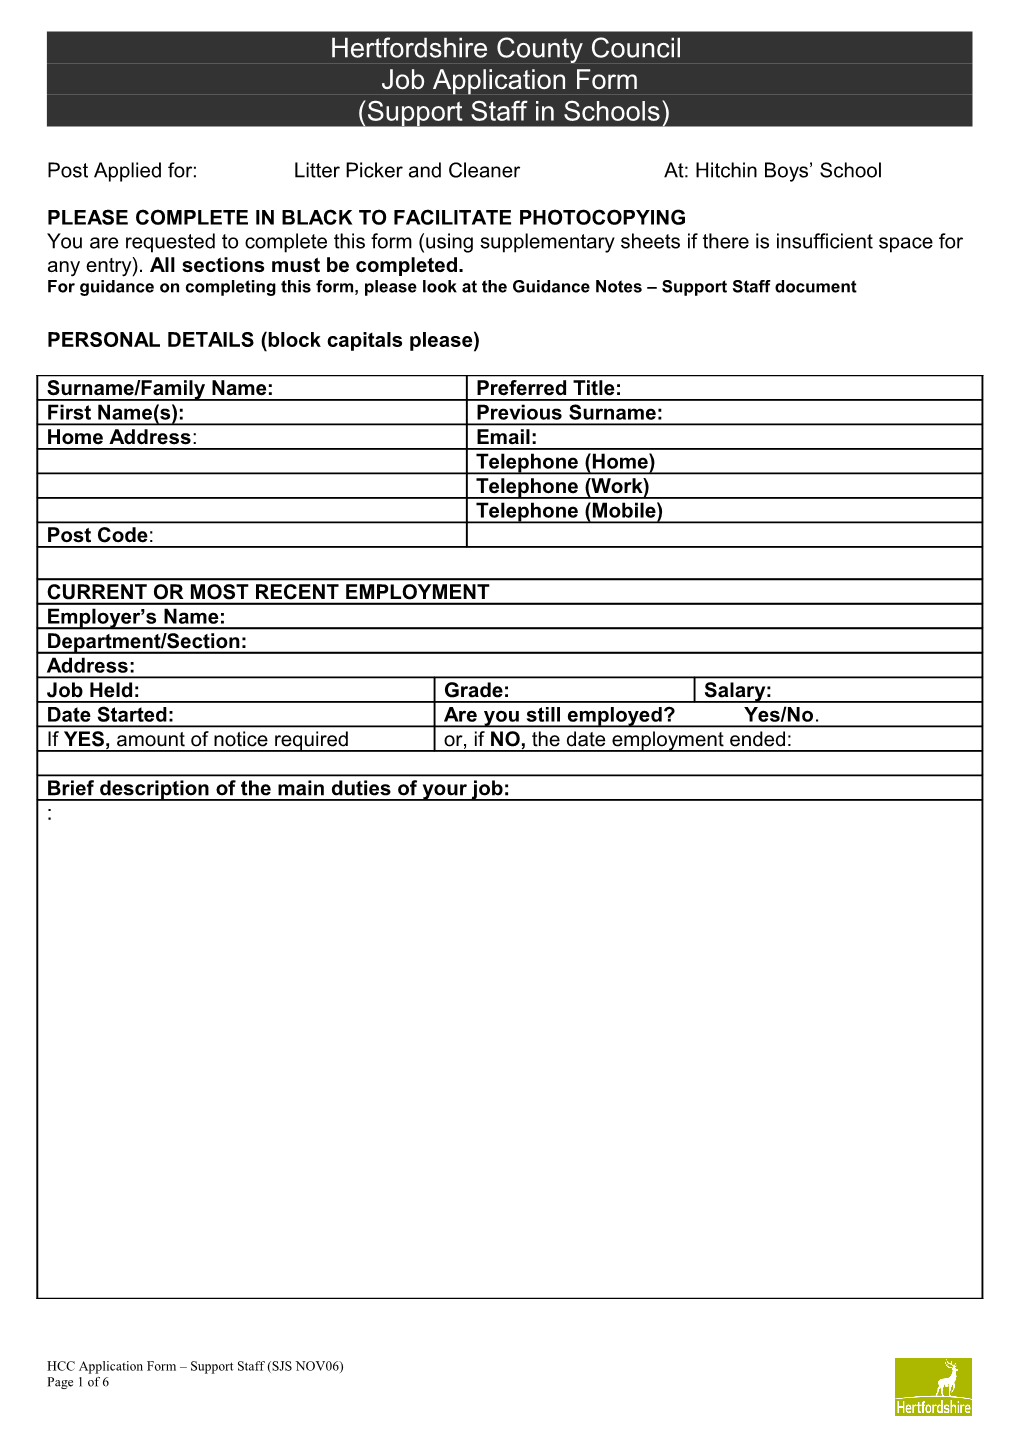 Hertfordshire County Council Job Application Form (Support Staff)